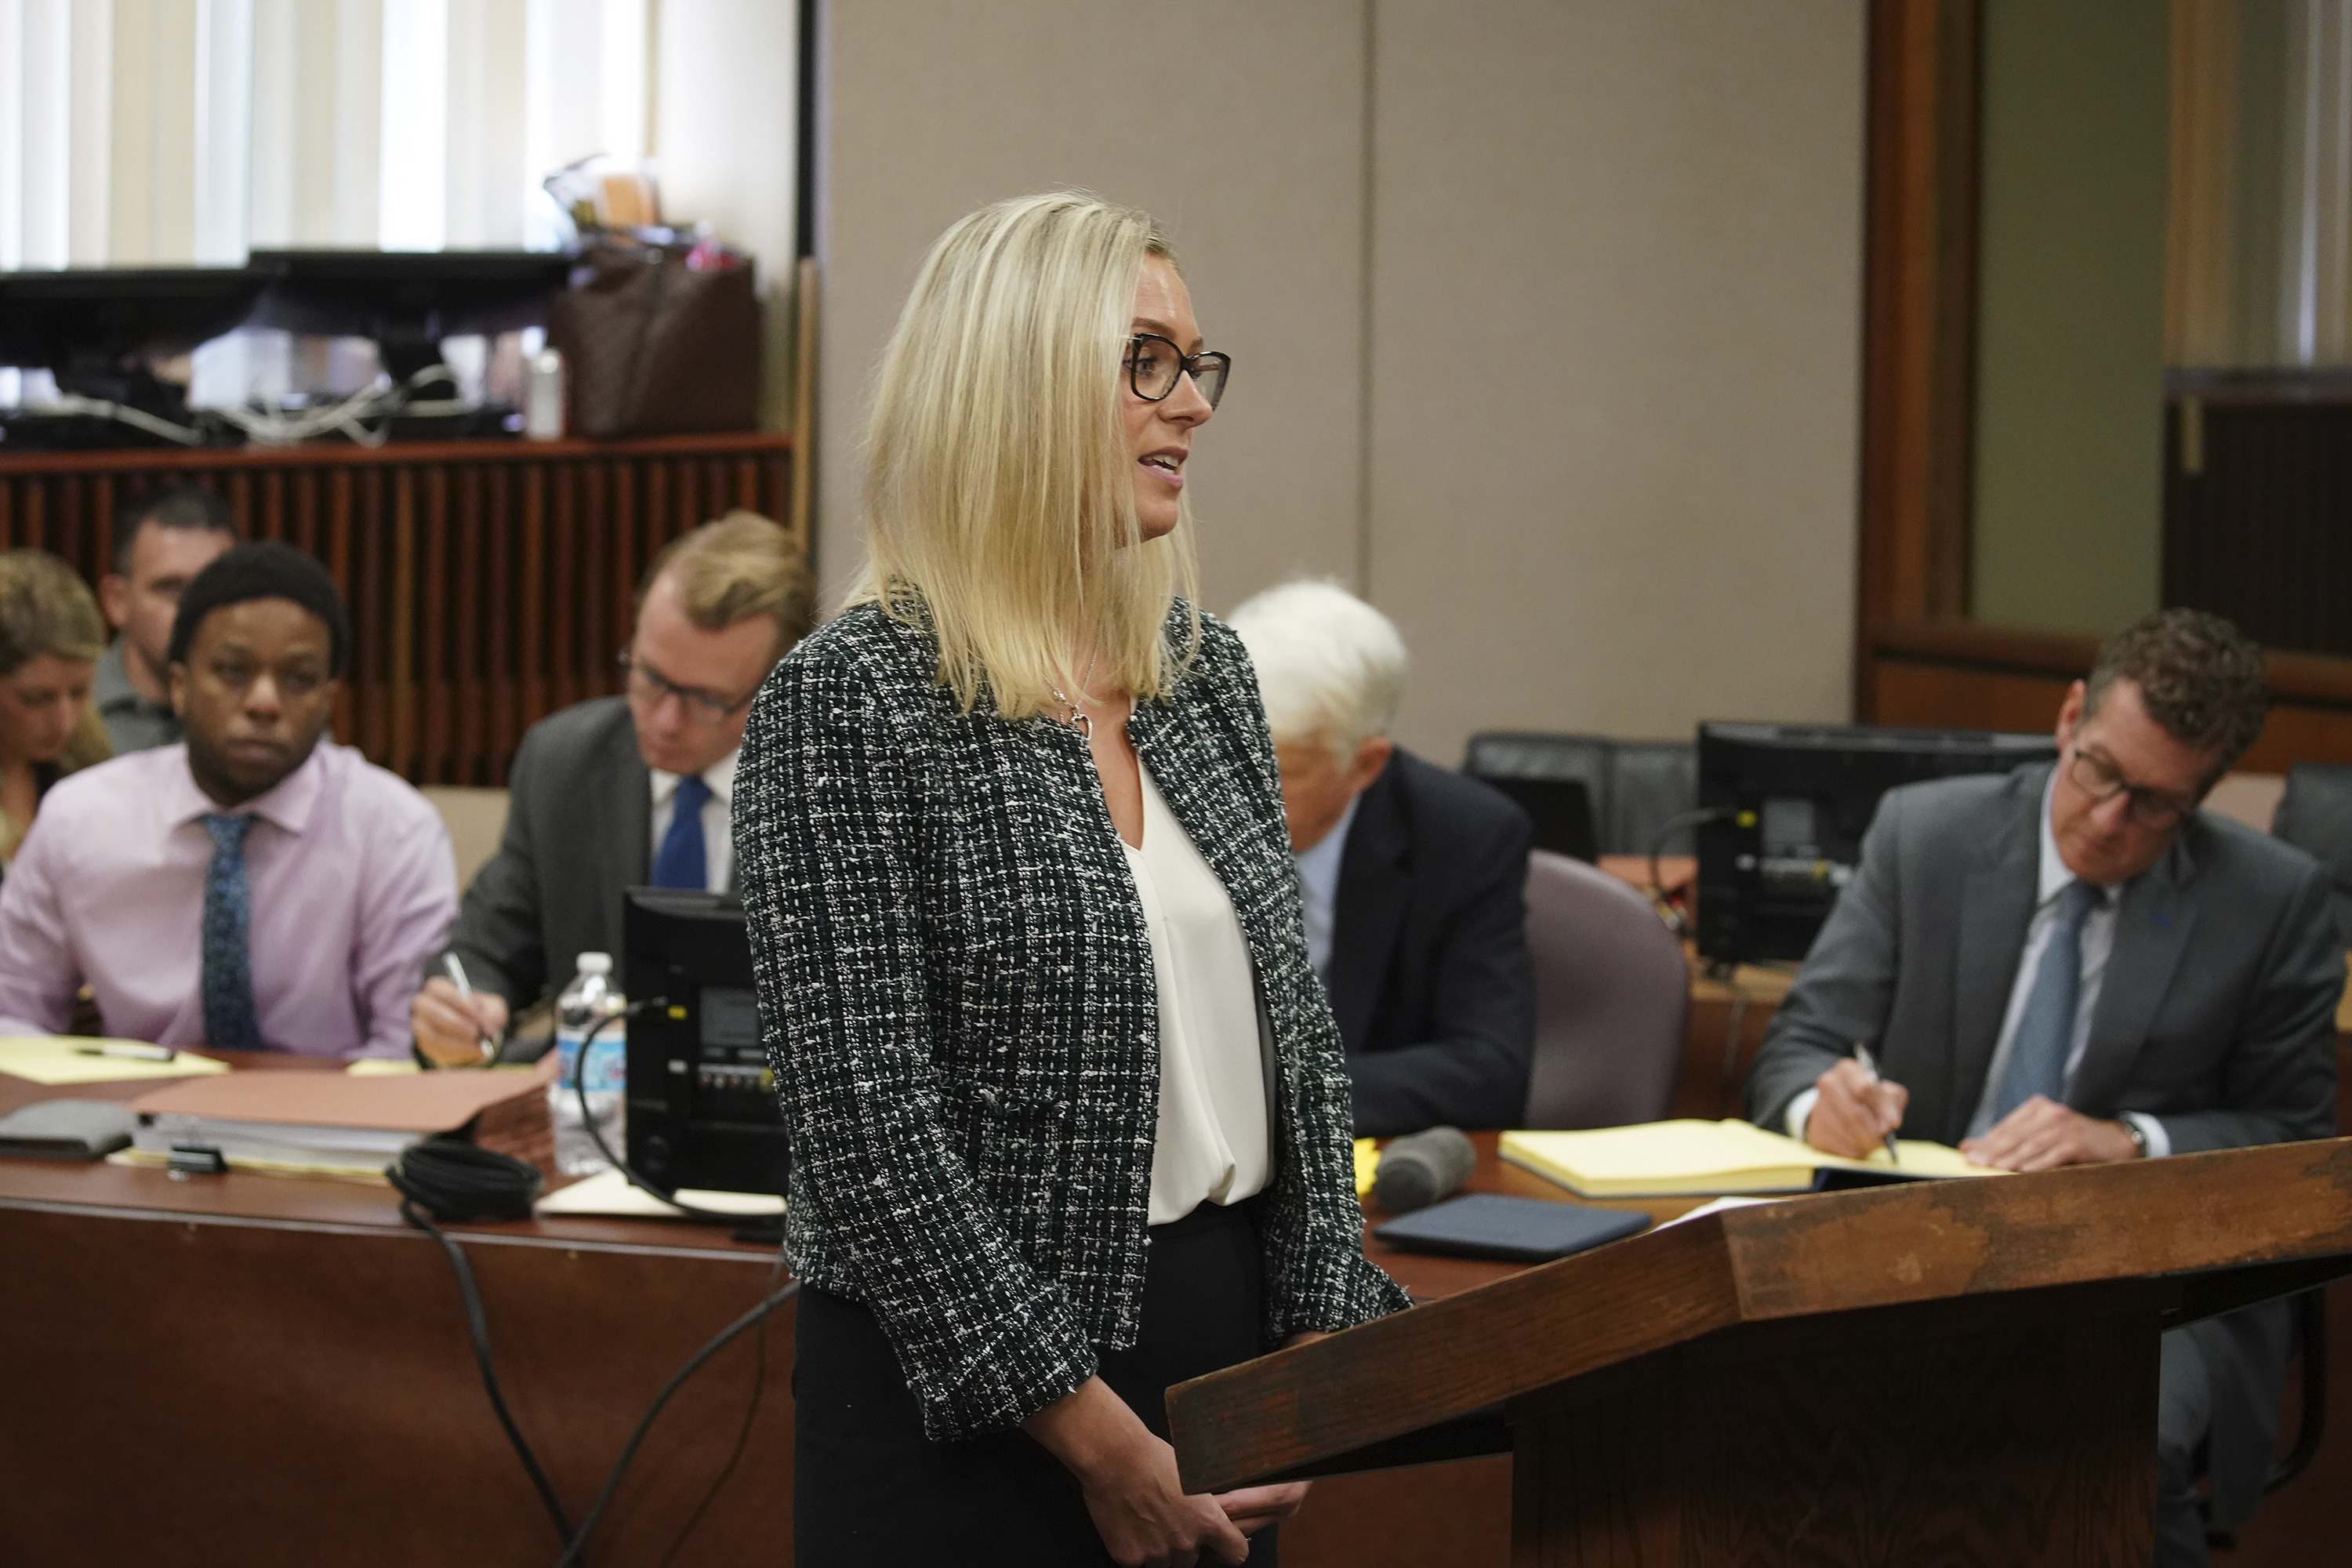 Assistant State's Attorney Margaret Hillmann makes opening statements in the trial of Corey Morgan for the murder of 9-year-old Tyshawn Lee at the Leighton Criminal Court building in Chicago on Tuesday, Sept. 17, 2019. (E. Jason Wambsgans—Chicago Tribune/AP)